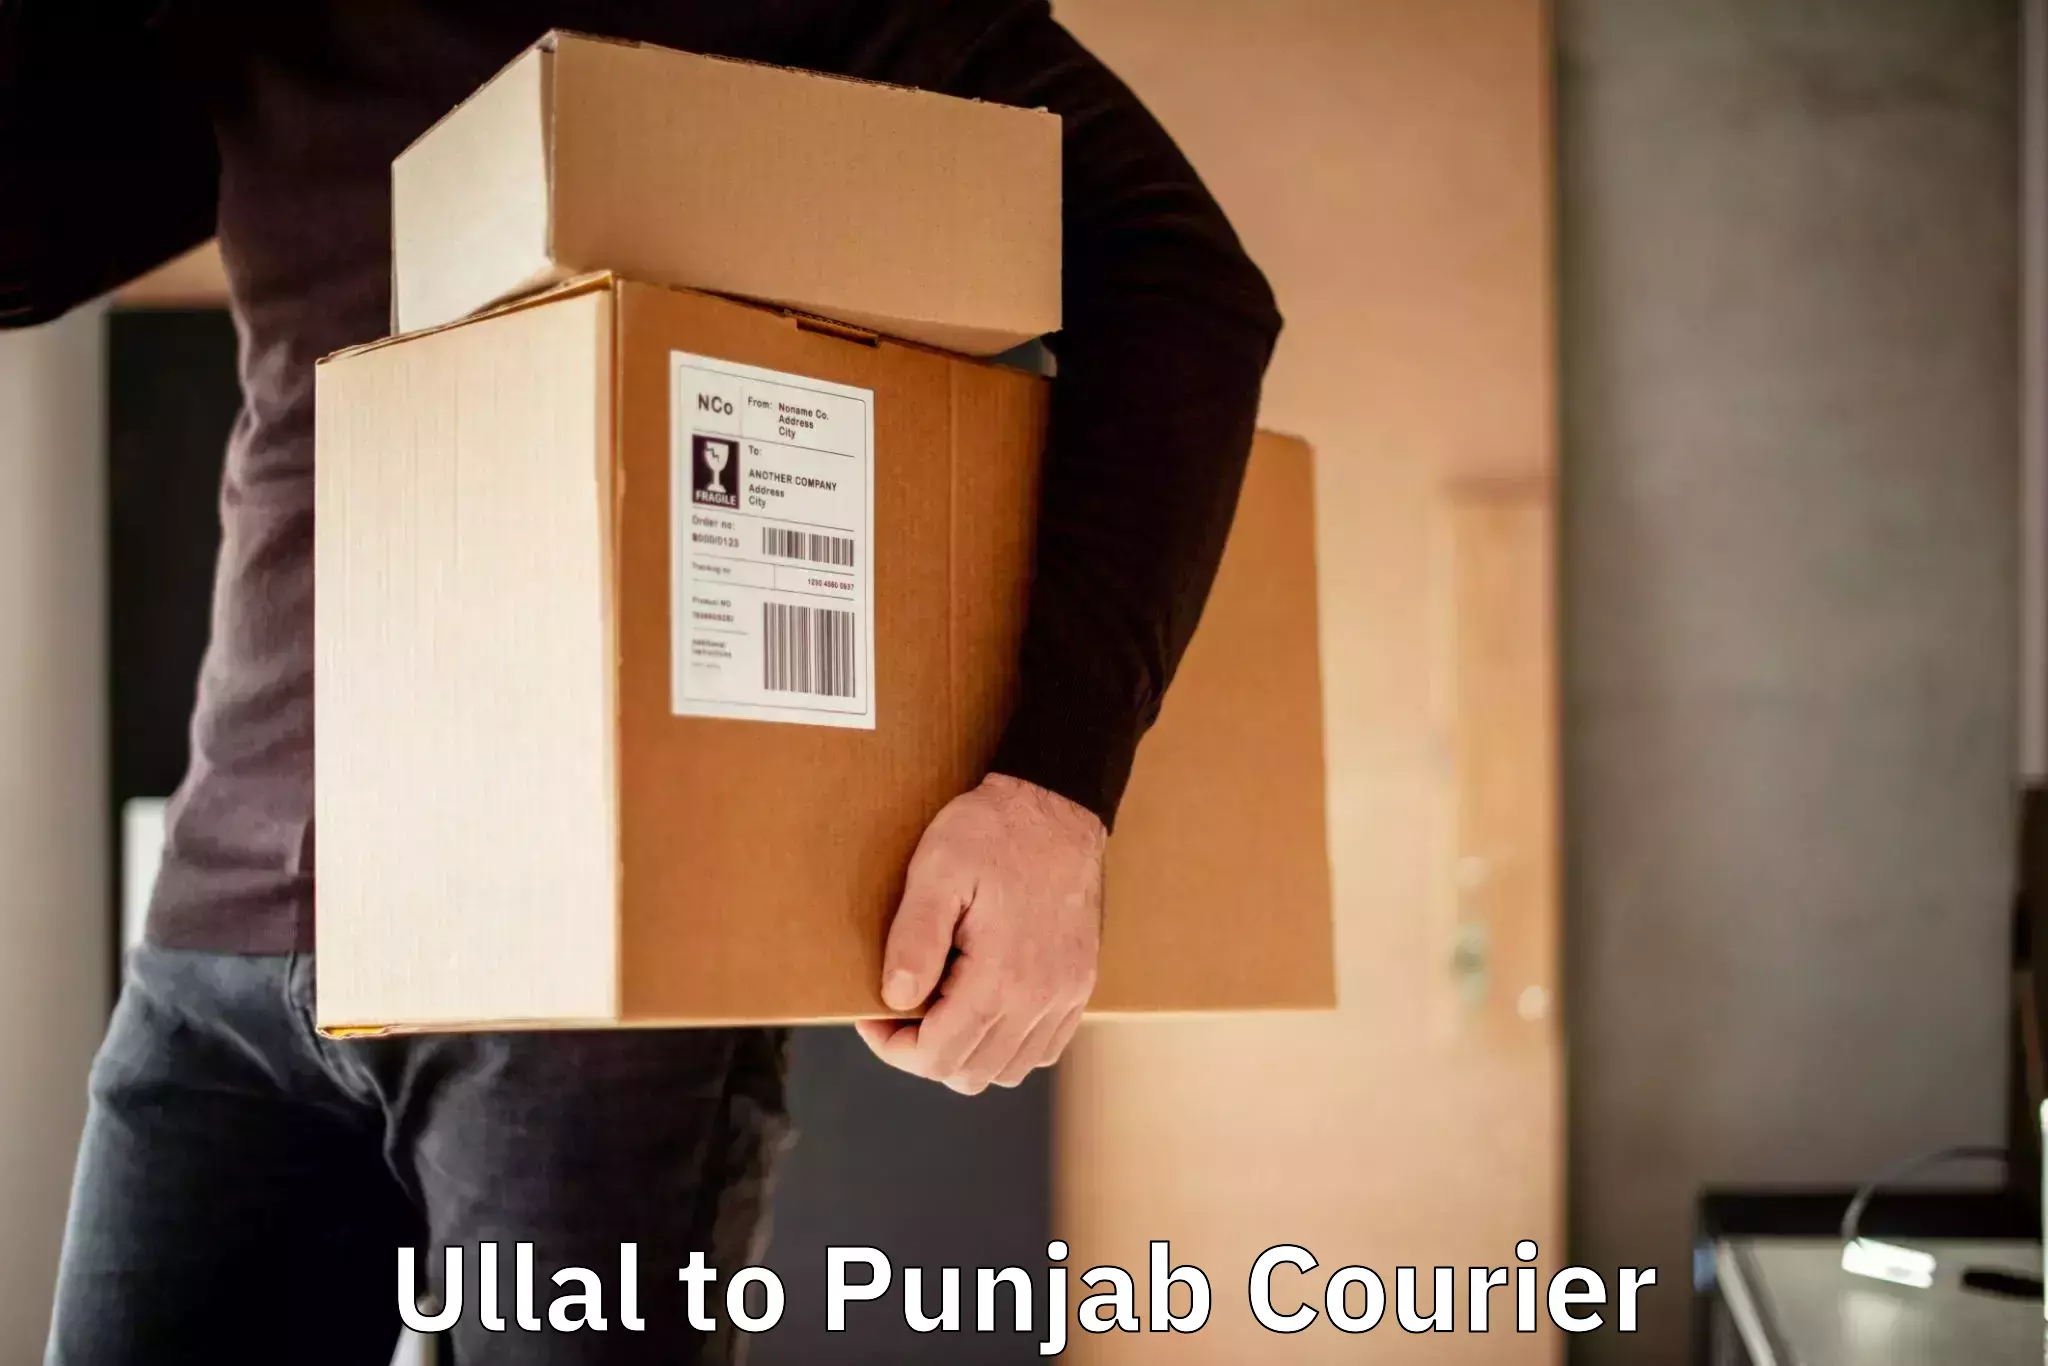 Next-generation courier services Ullal to Patiala